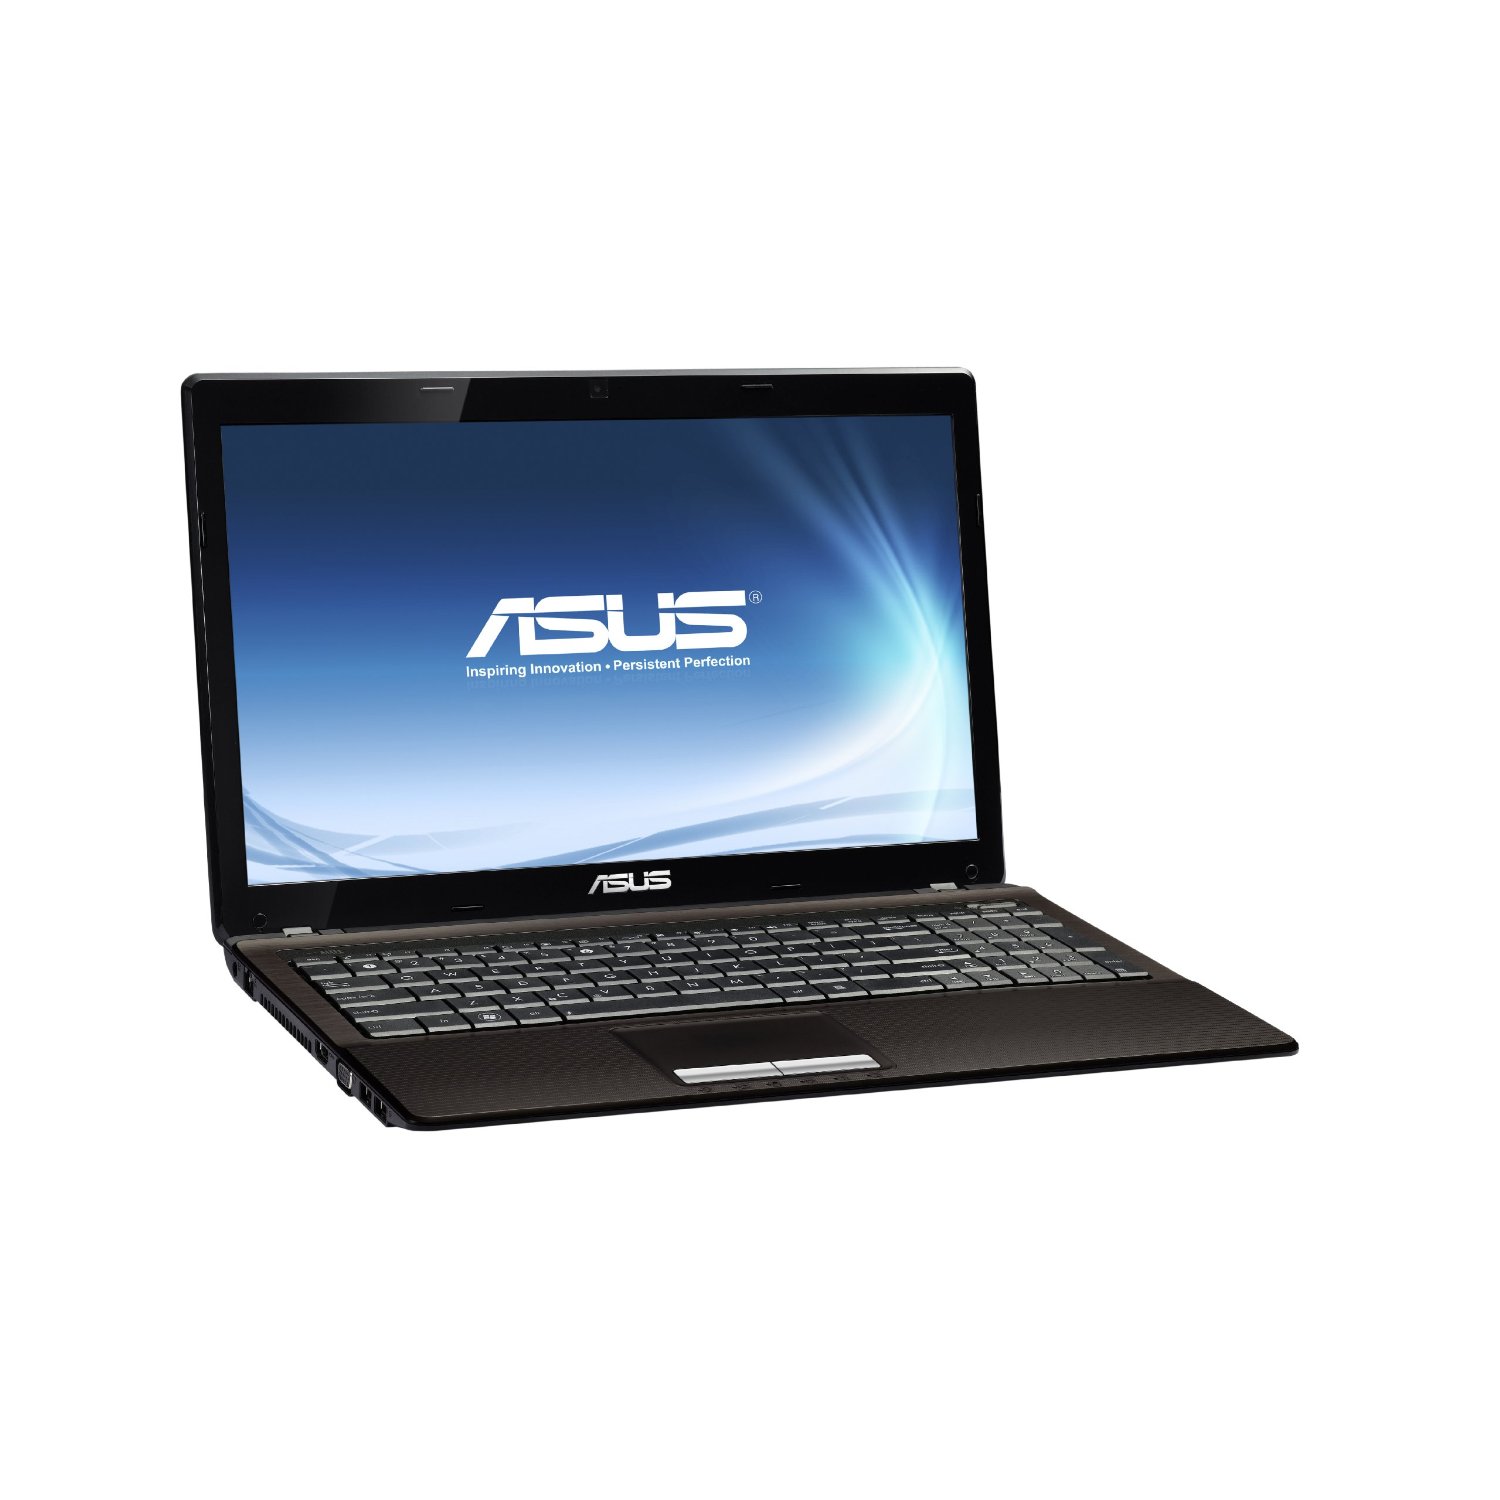 http://thetechjournal.com/wp-content/uploads/images/1202/1329721072-asus-a53ues21-156inch-laptop-5.jpg